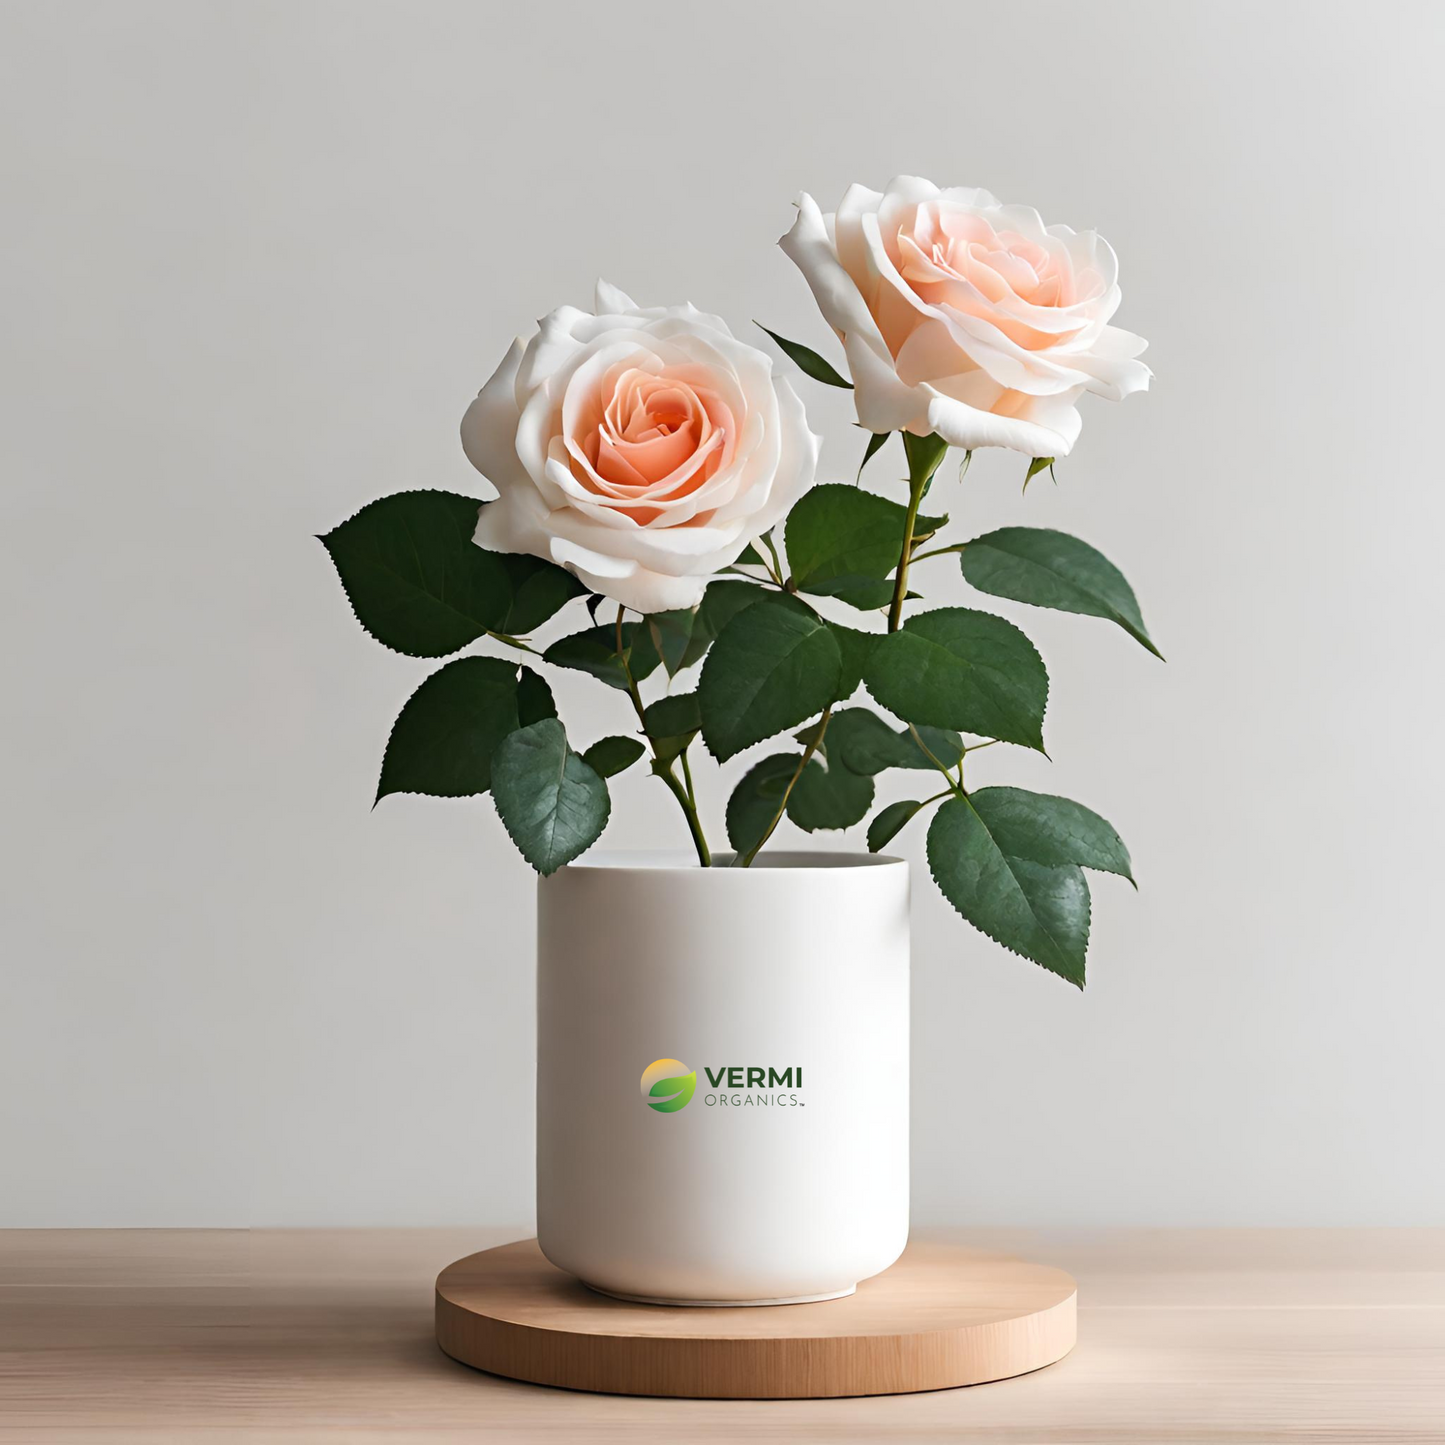 Scented rose (Any Variety Any Color) Plant